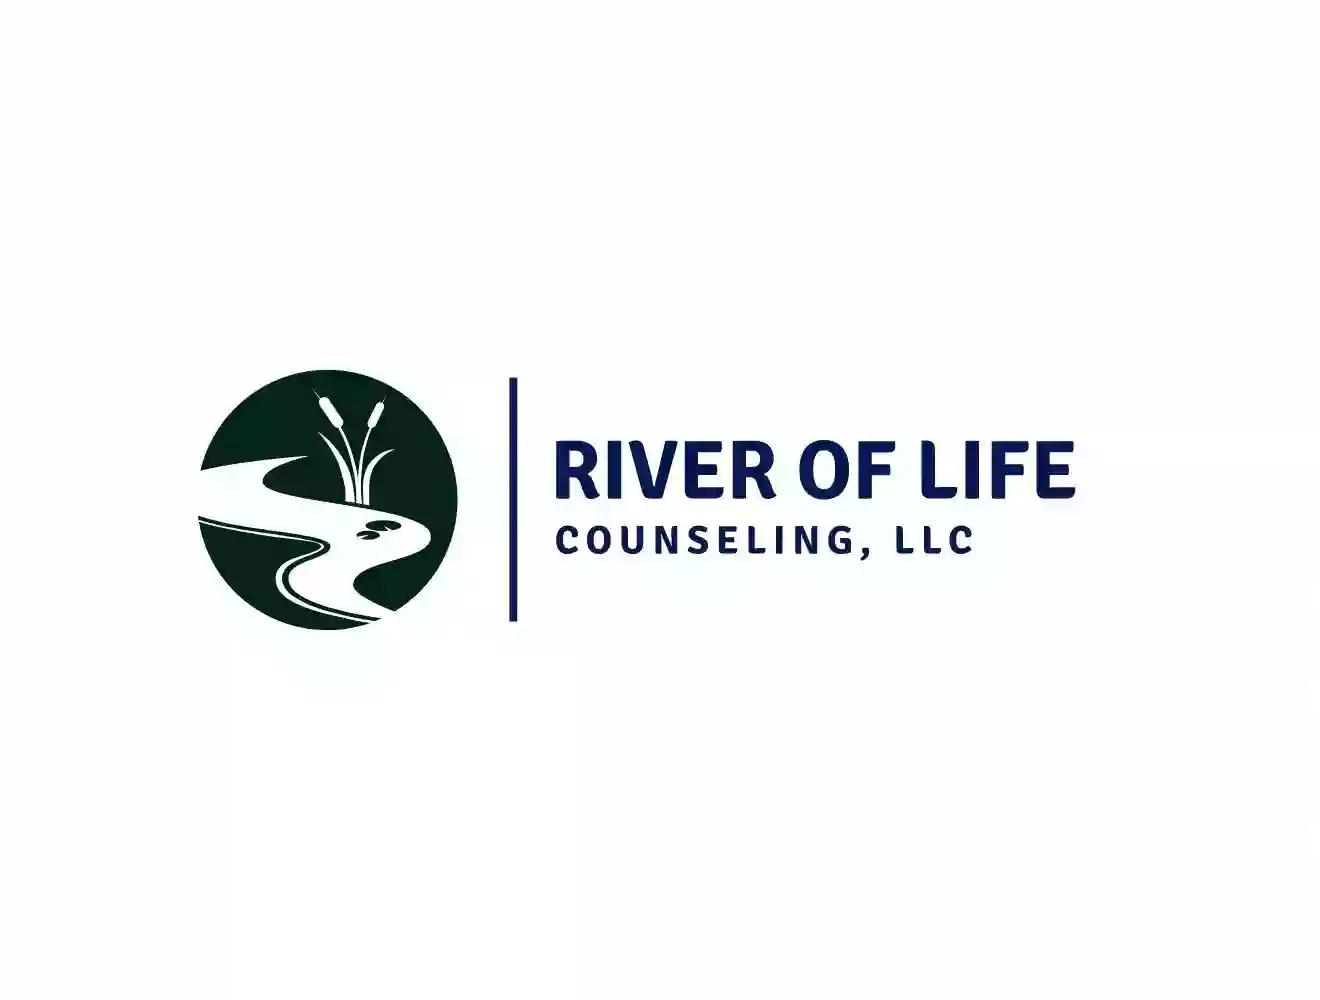 River of Life Counseling LLC